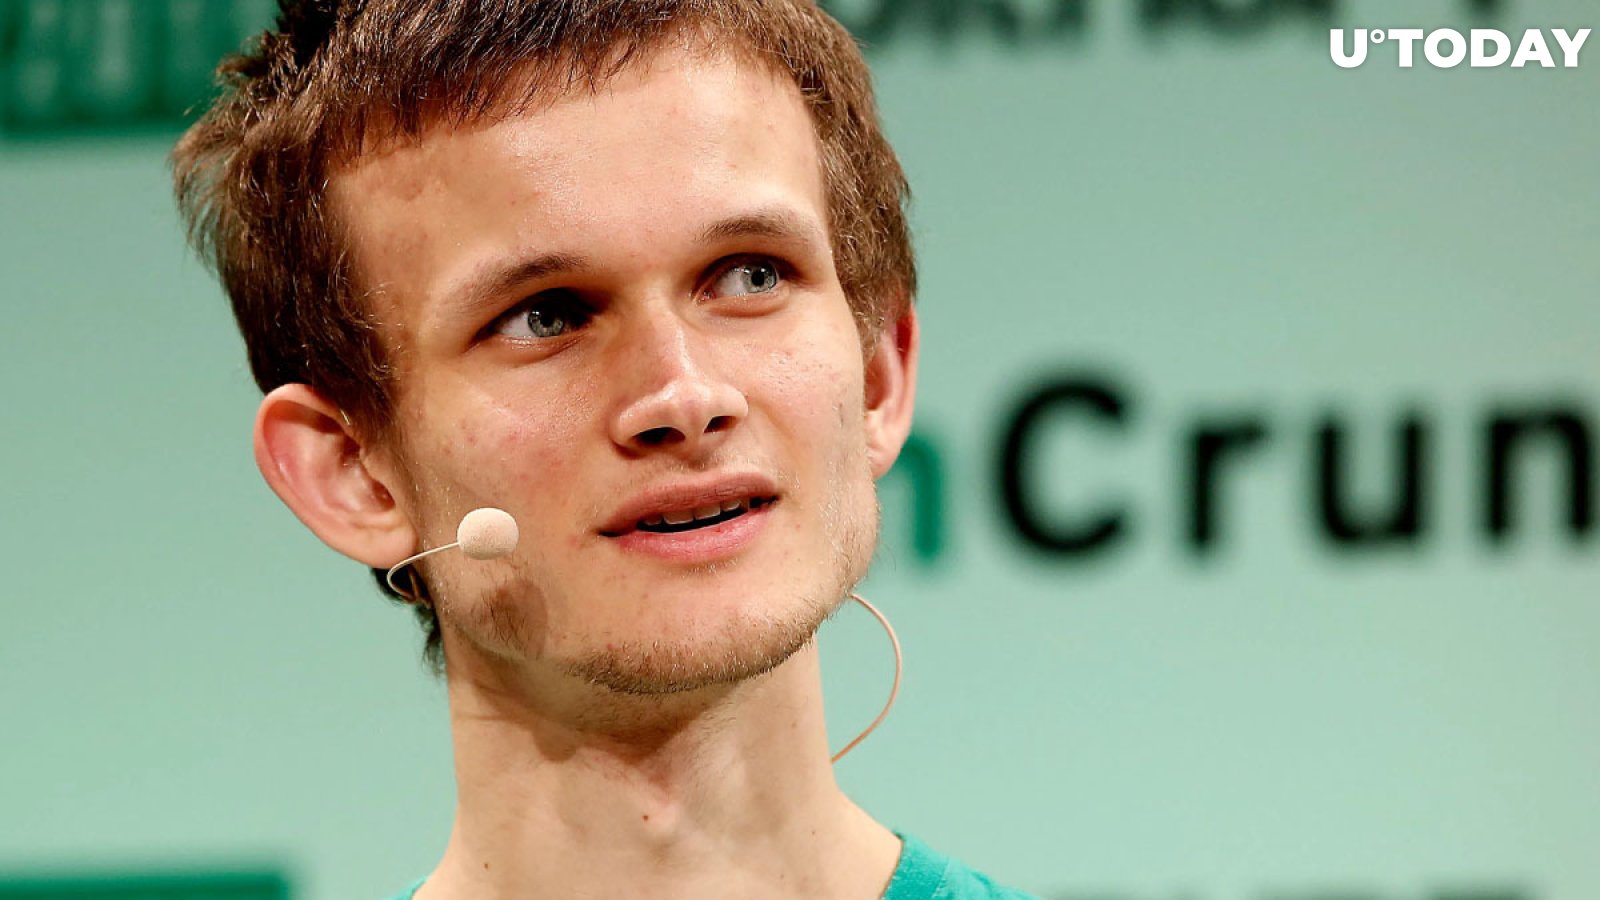 Ethereum Co-Founder Vitalik Buterin Says He Disagrees with Bitcoin's Stock-to-Flow Model